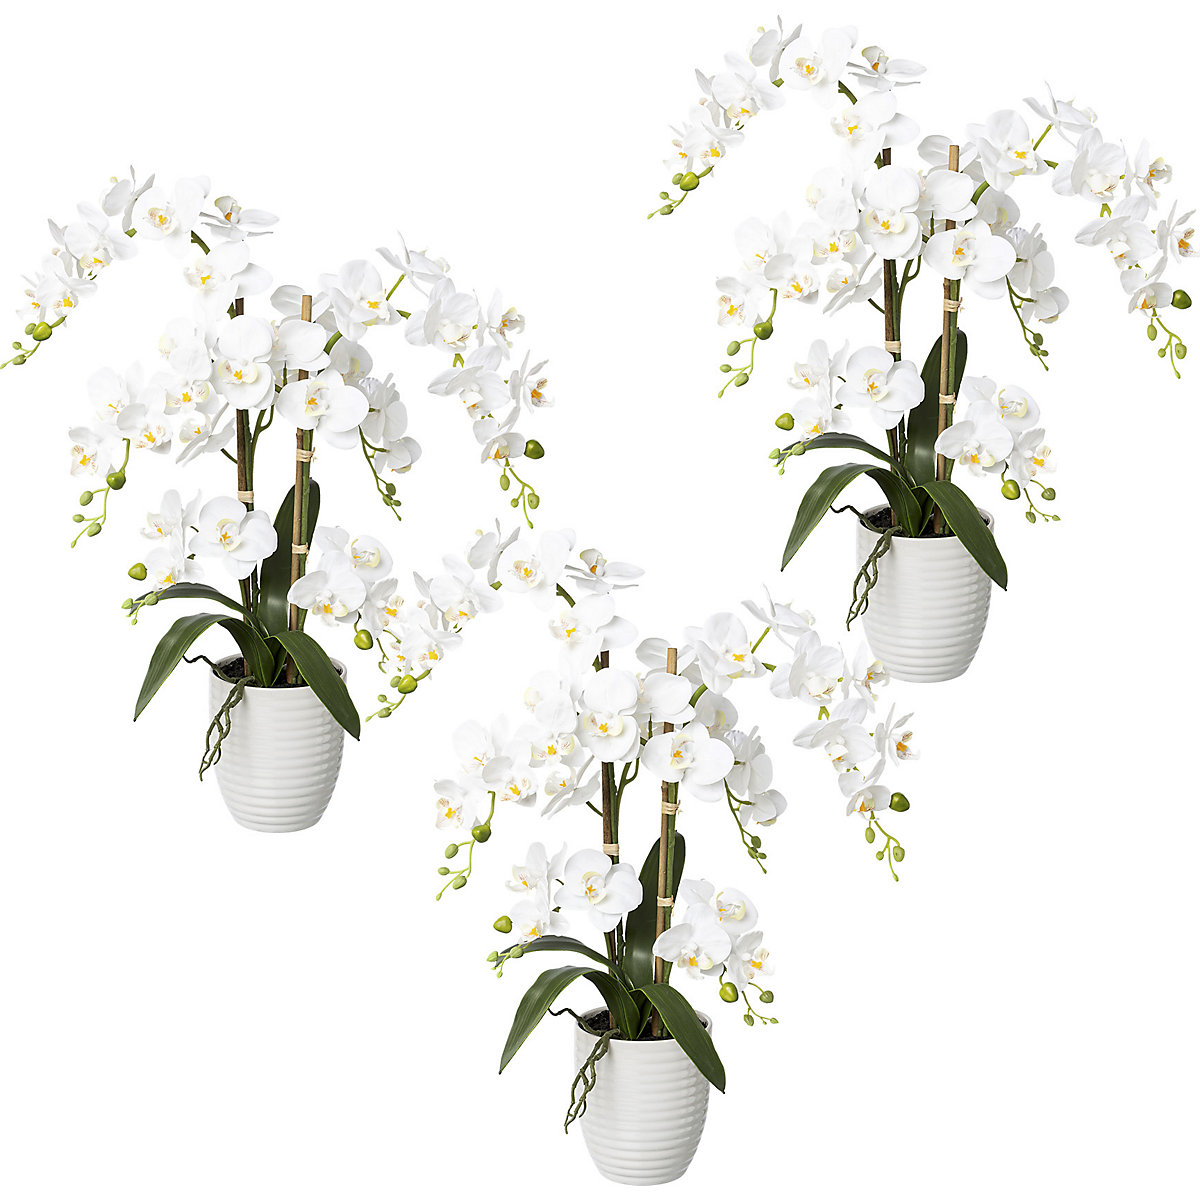 Phalaenopsis, real touch